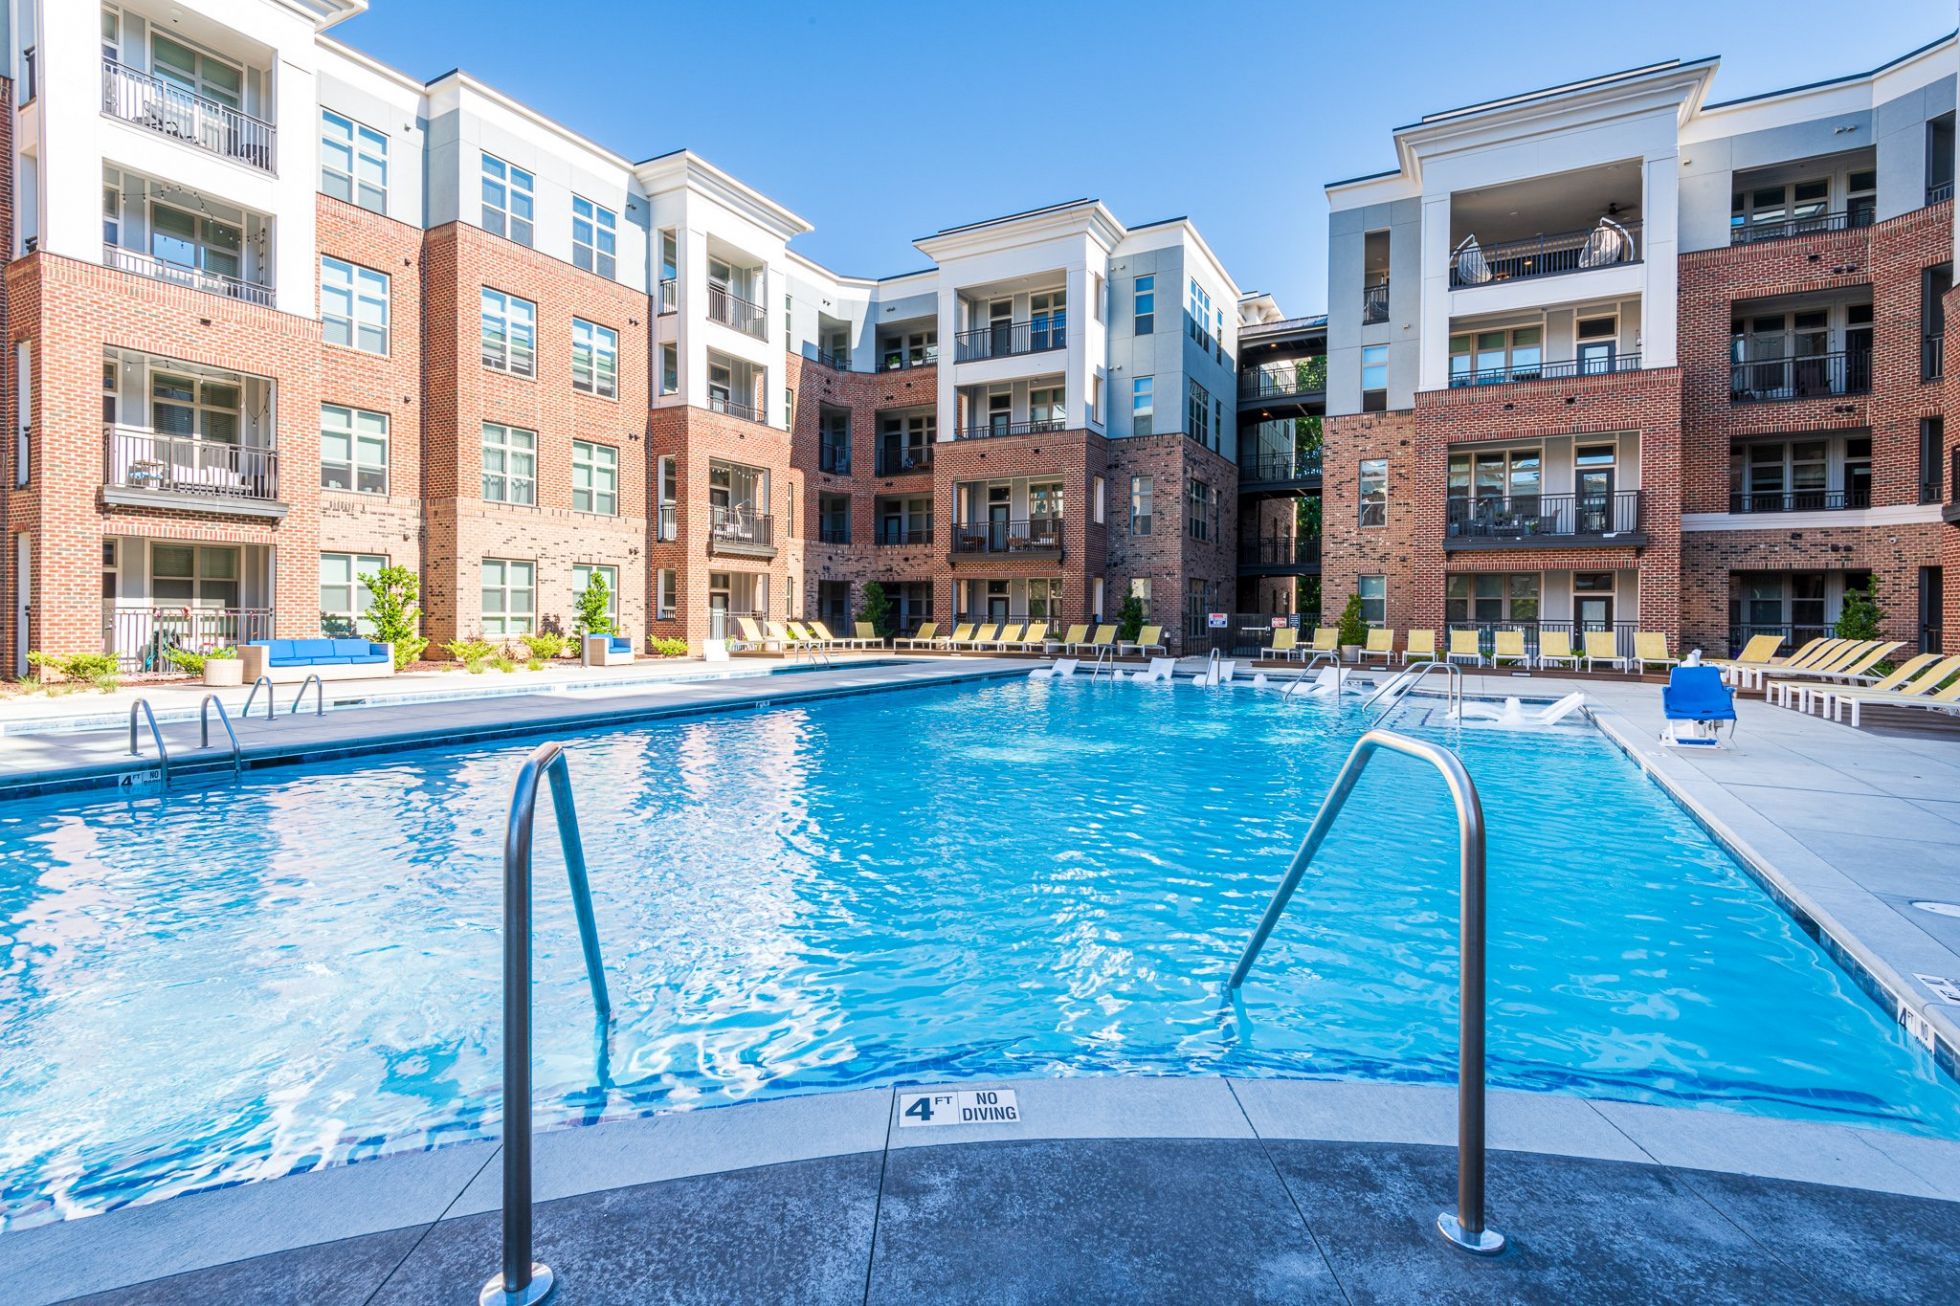 Luxury outdoor pool with lounge seating at Carraway Village Apartments